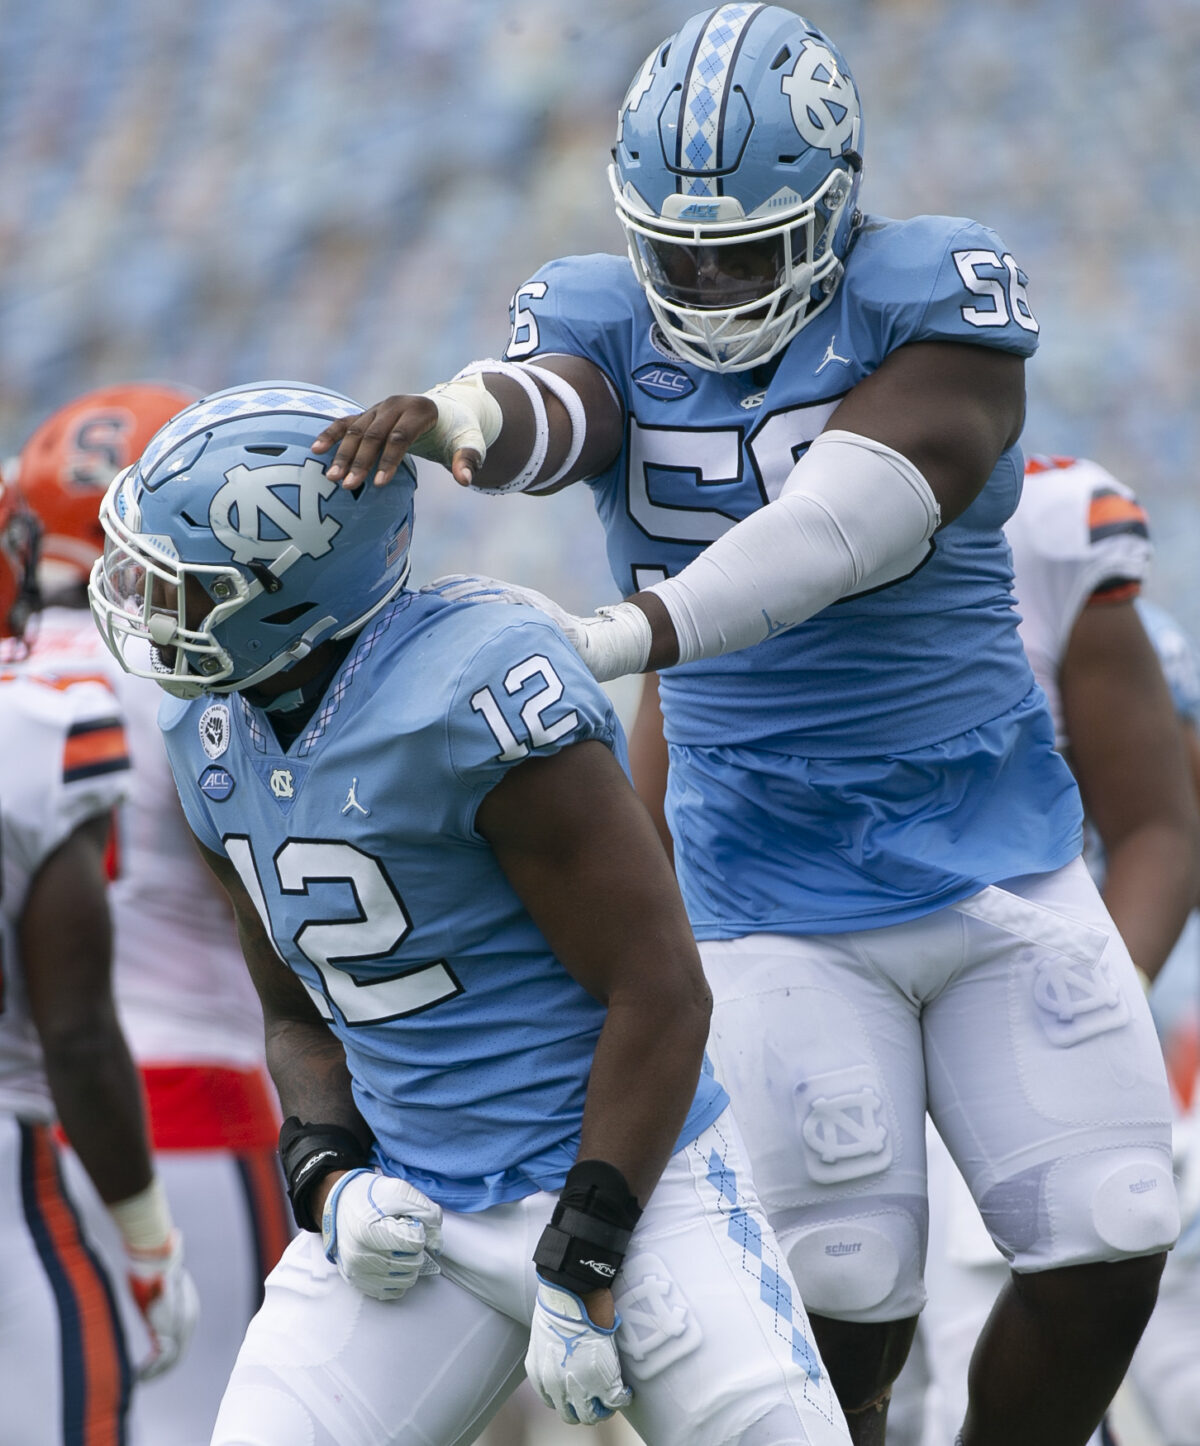 Tomari Fox returning to UNC defensive line from year-long suspension